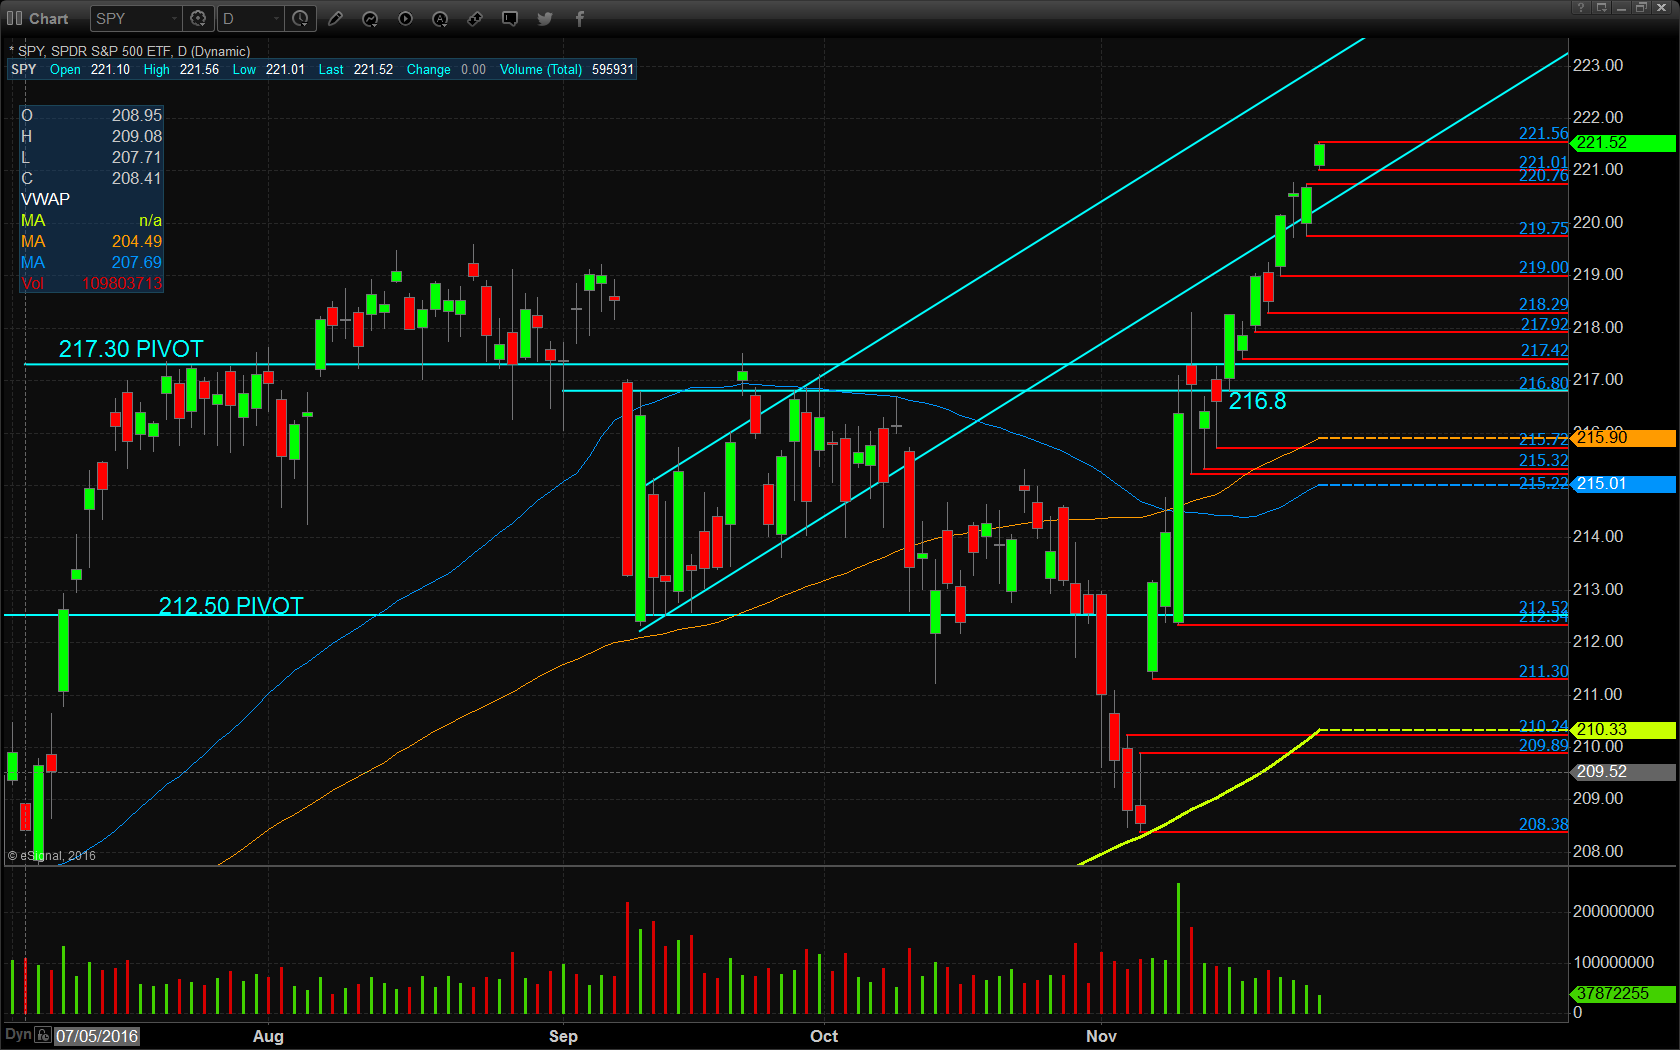 S&P 500 ETF Daily Chart